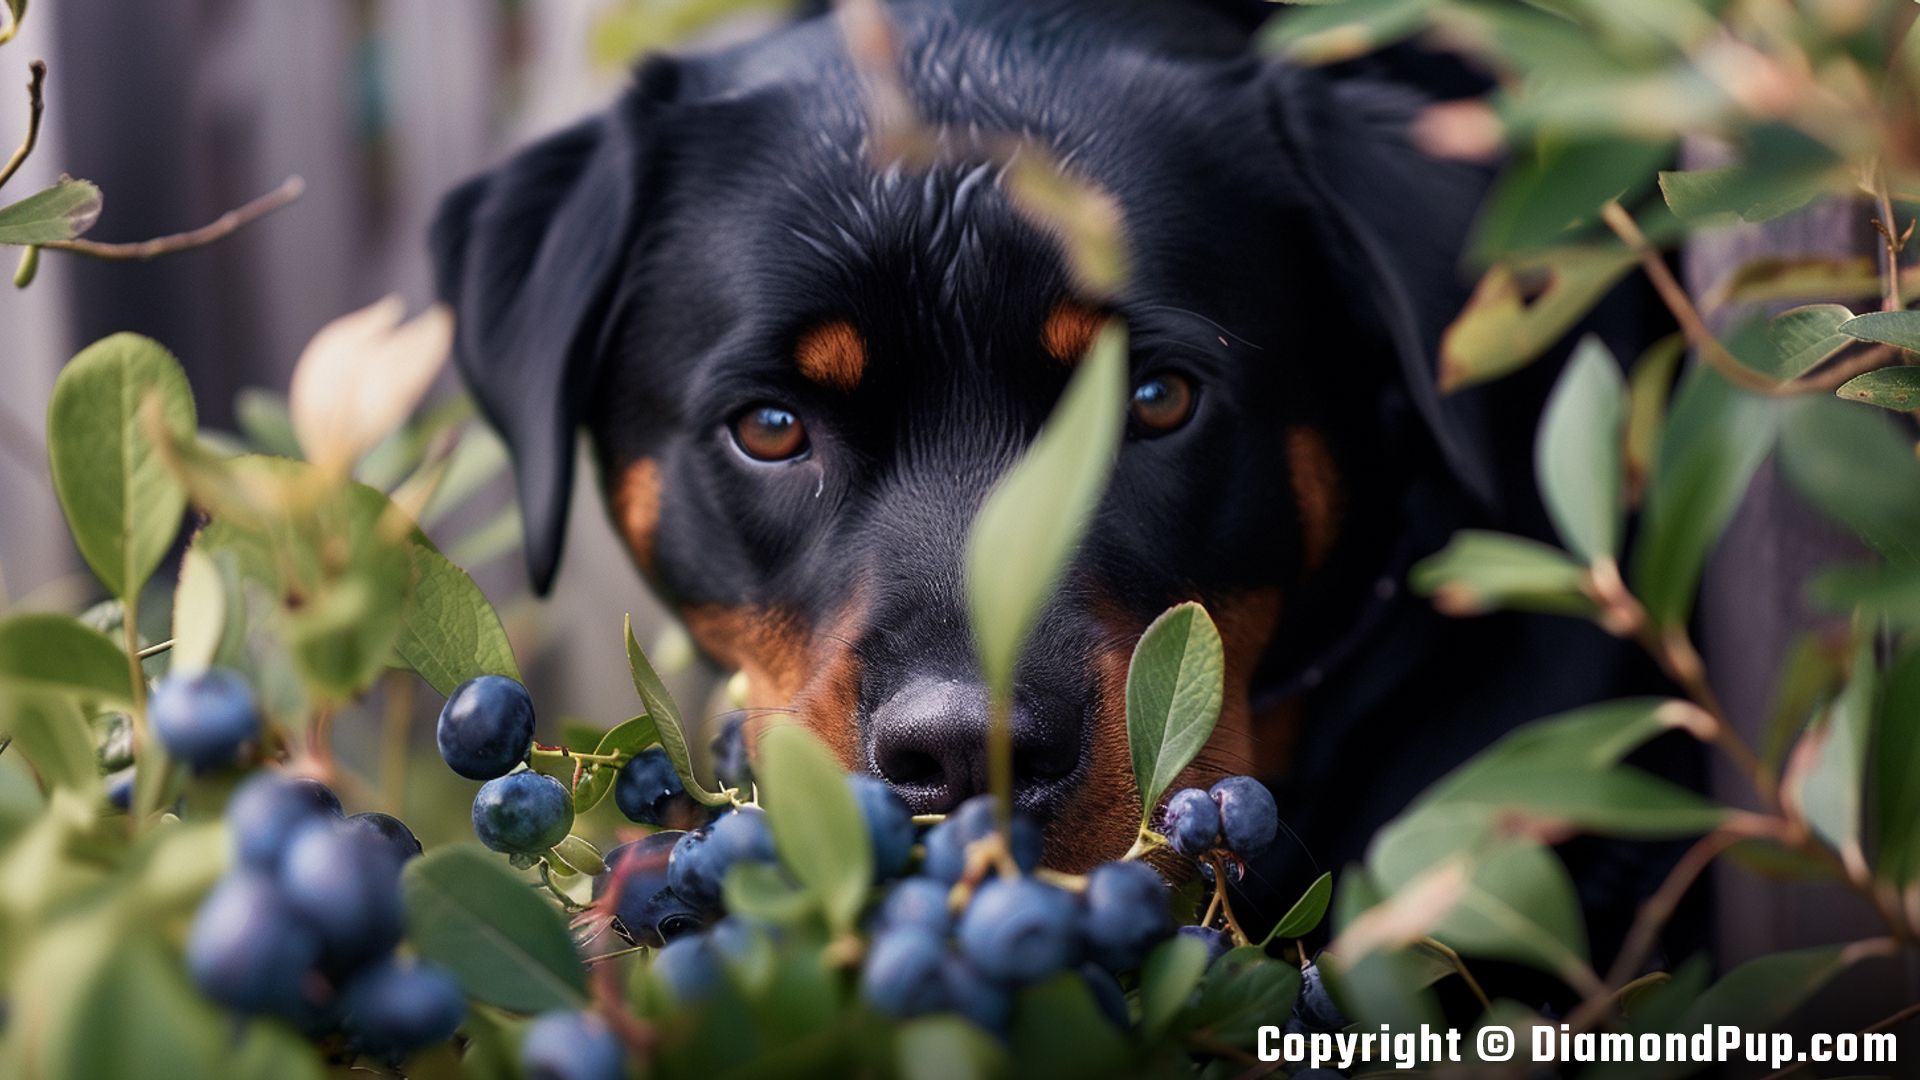 Photograph of a Playful Rottweiler Snacking on Blueberries